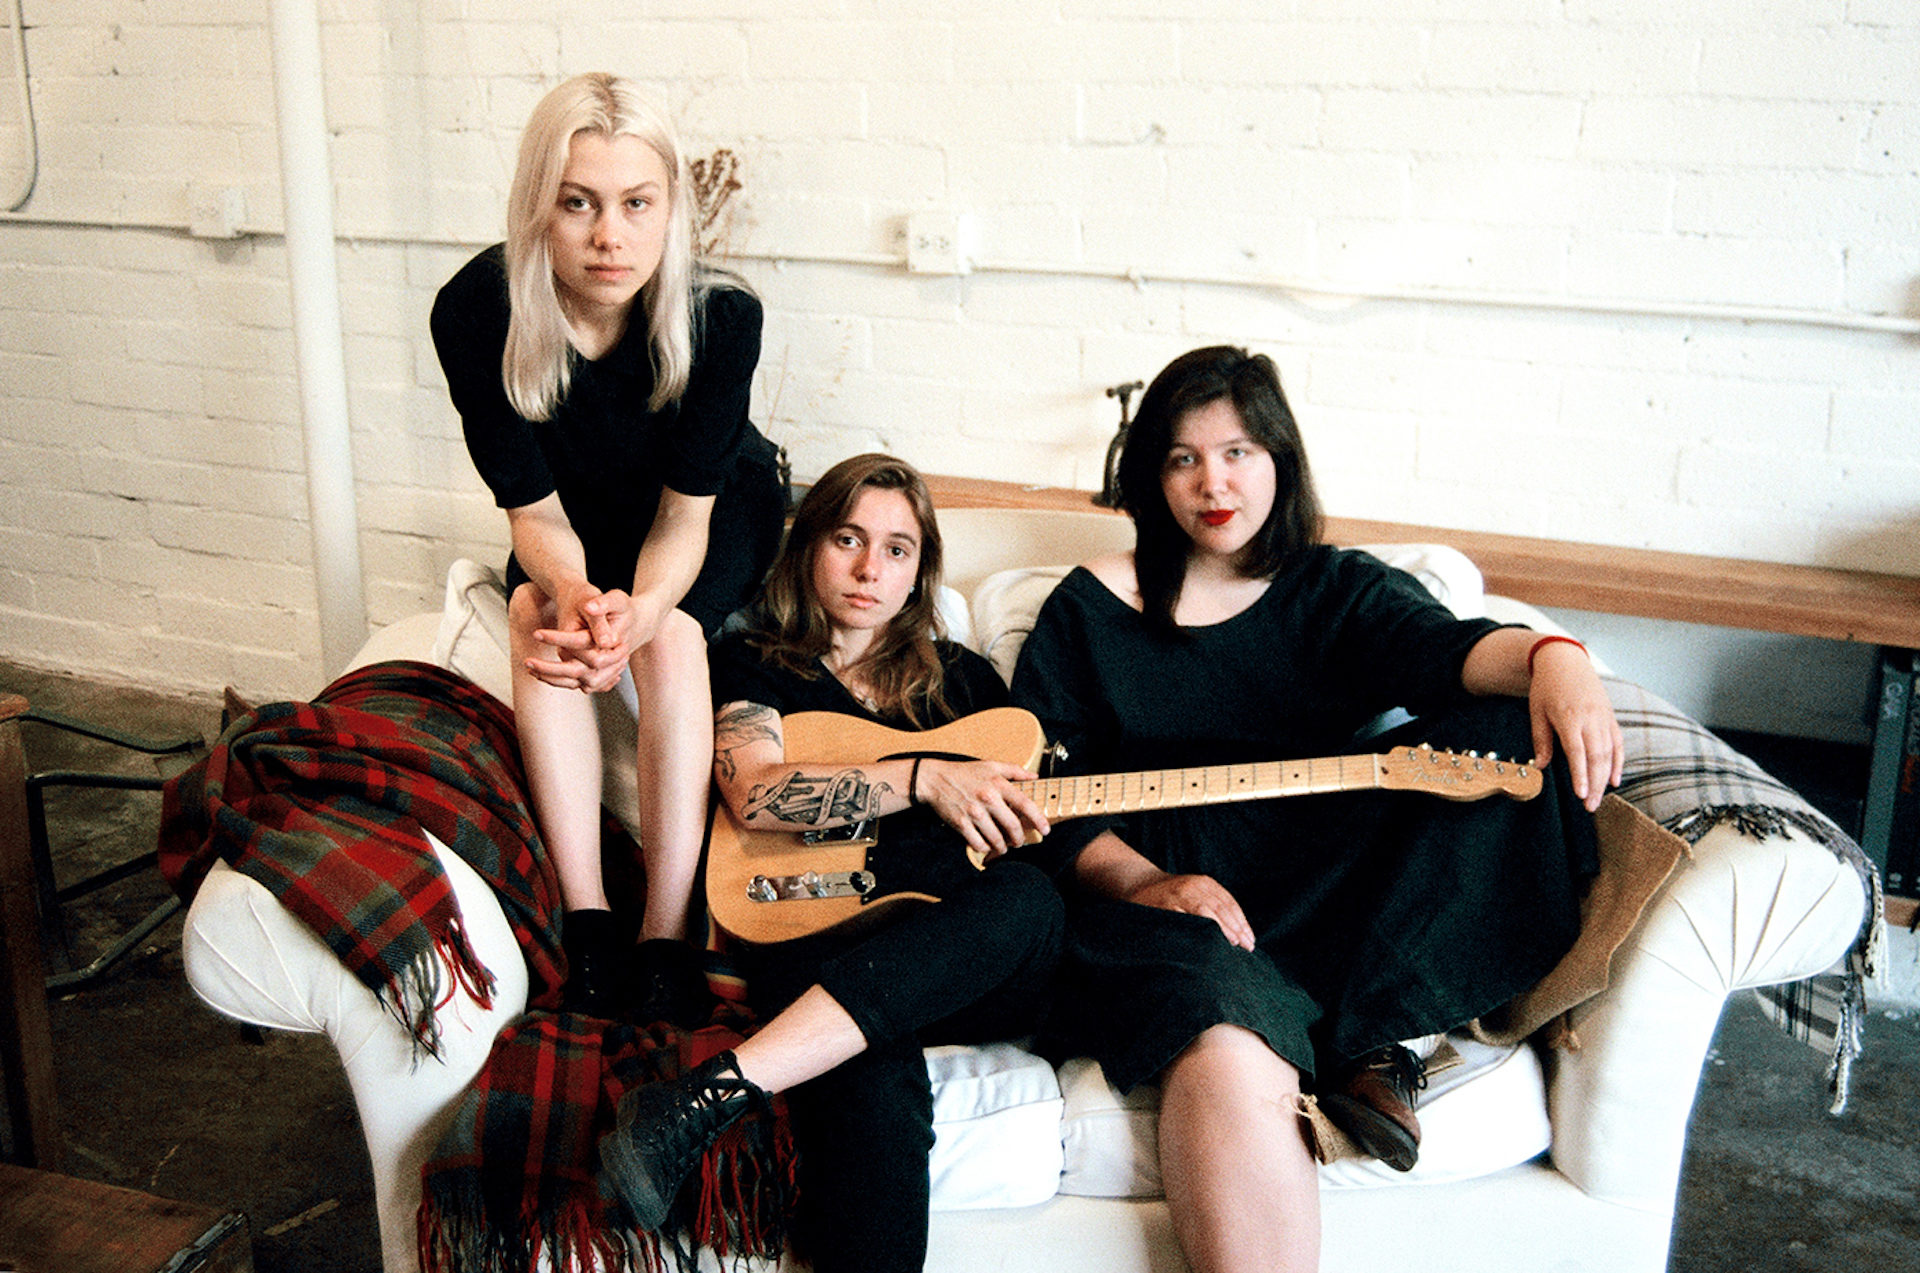 The band, boygenius, is back together again. Julien Baker, Phoebe Bridgers, and Lucy Dacus return with three new songs.